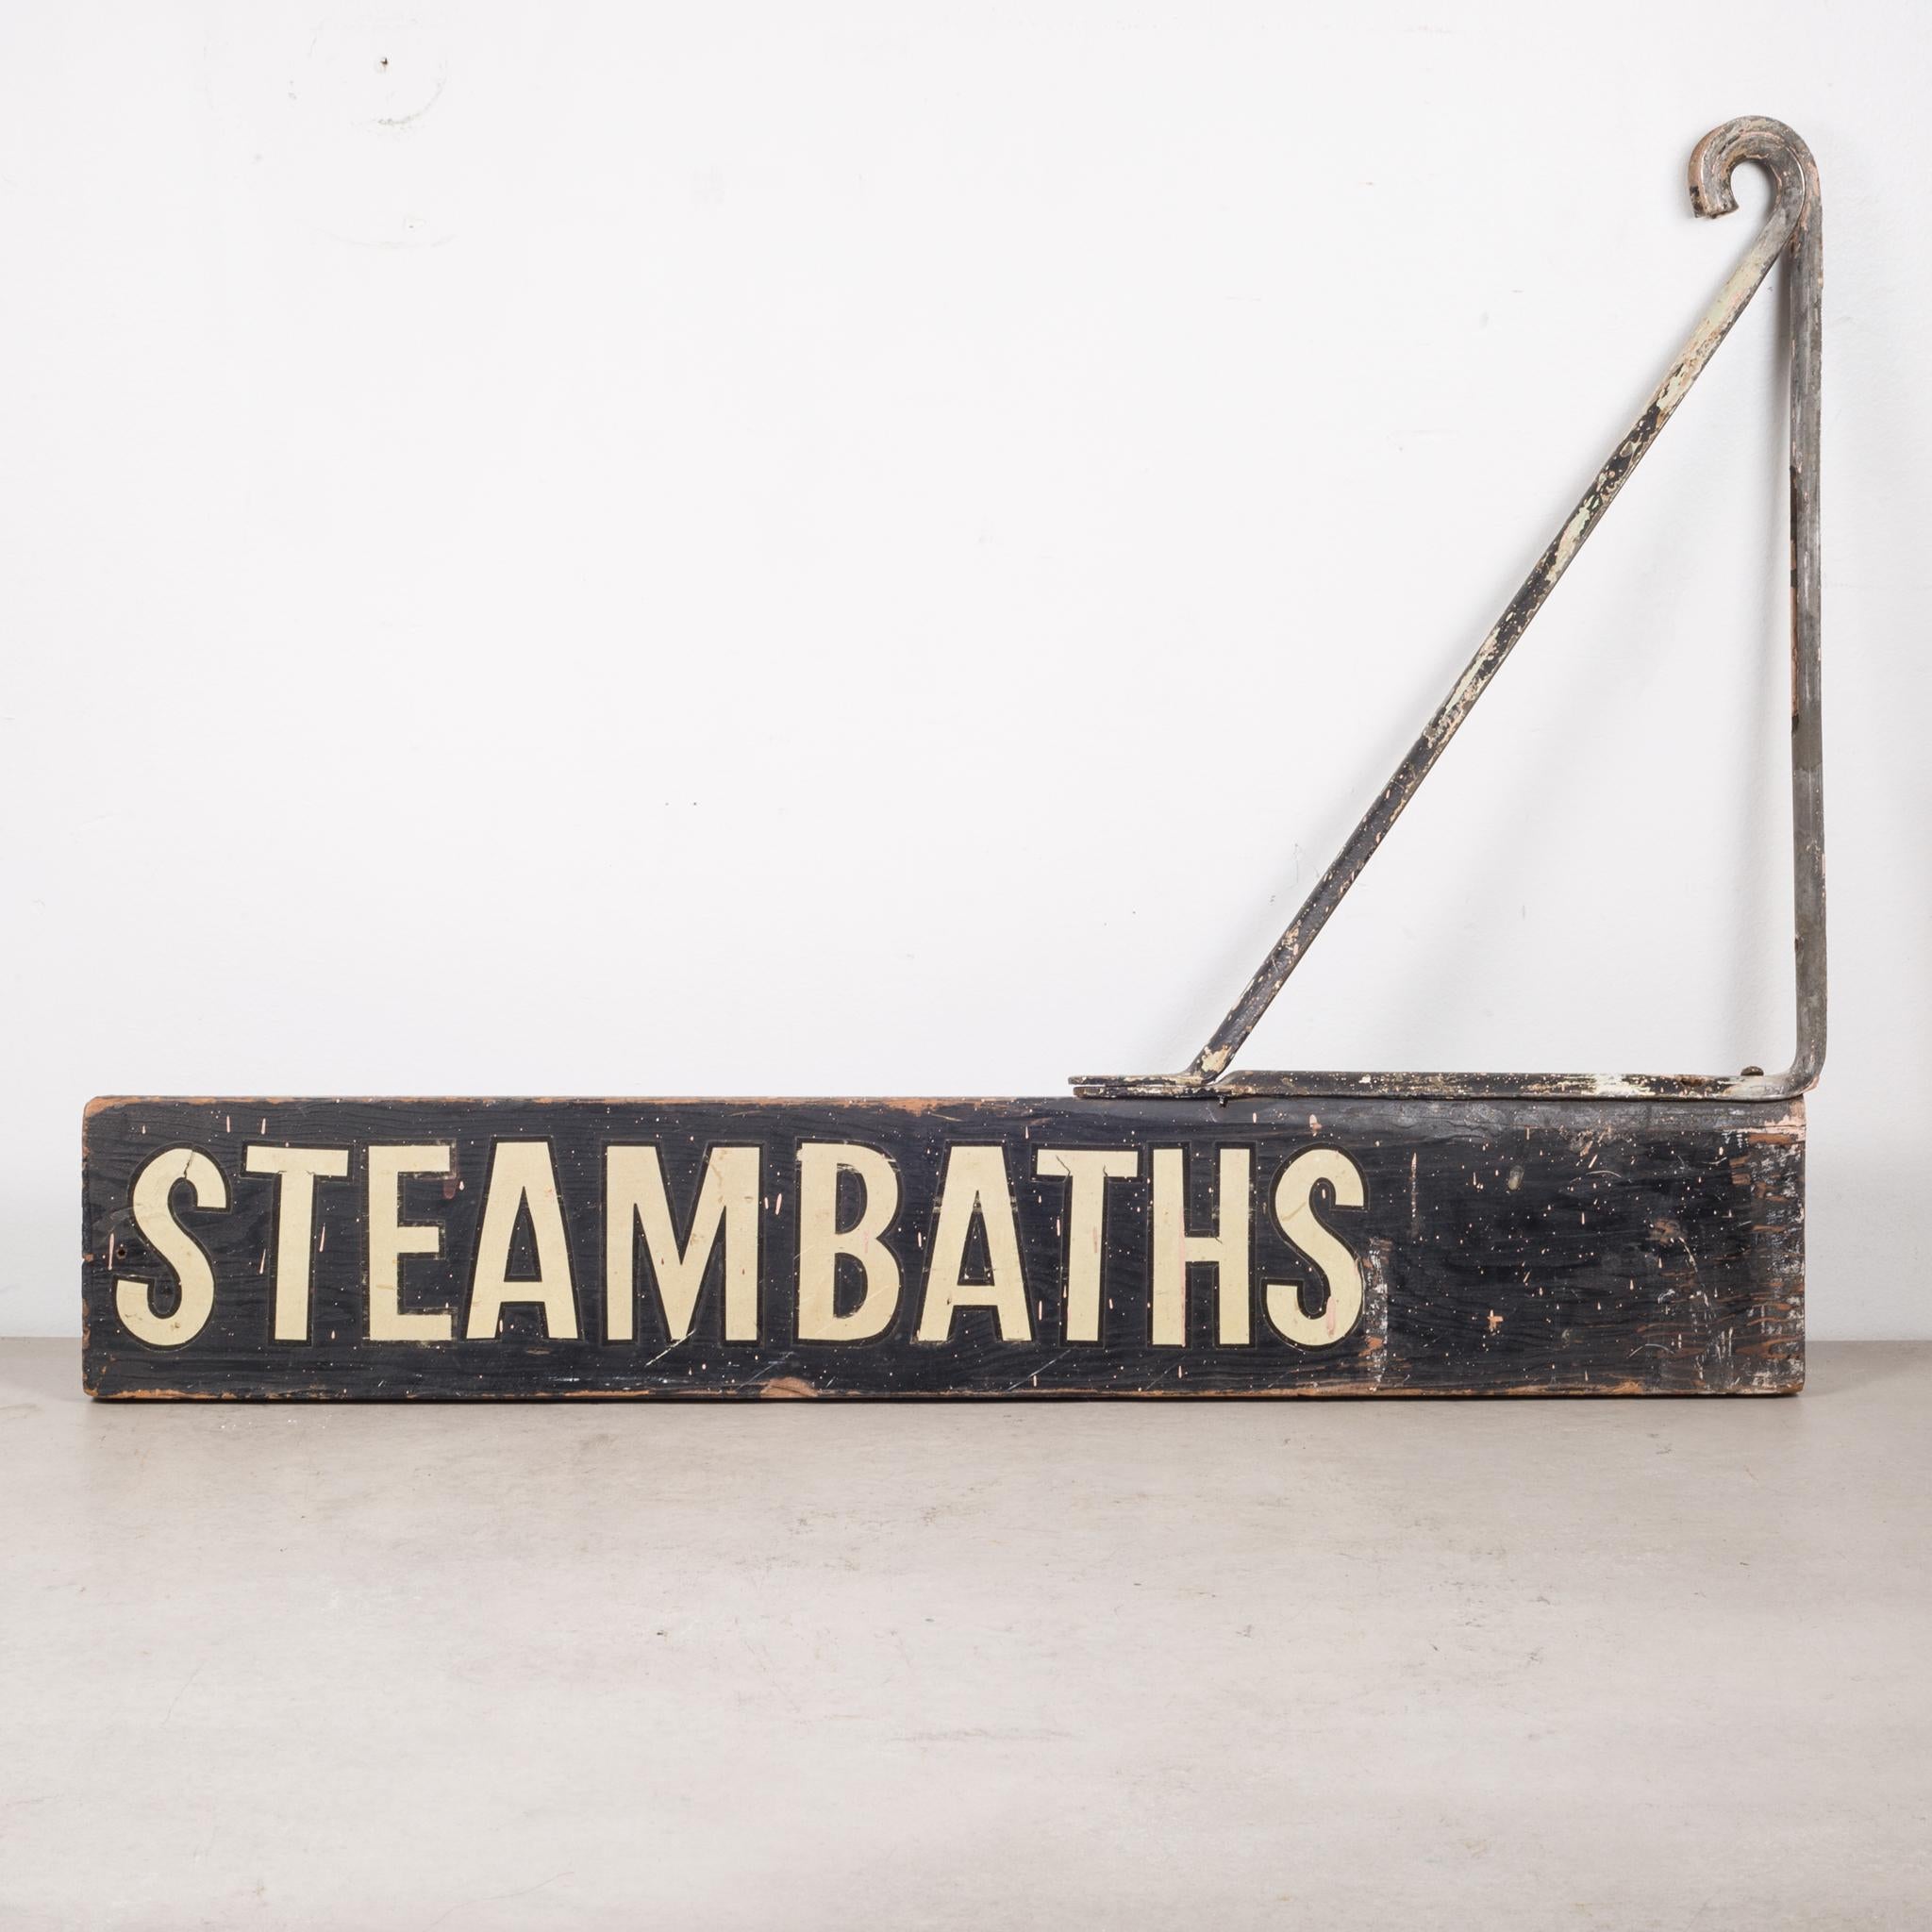 About:

An original wooden sign with 